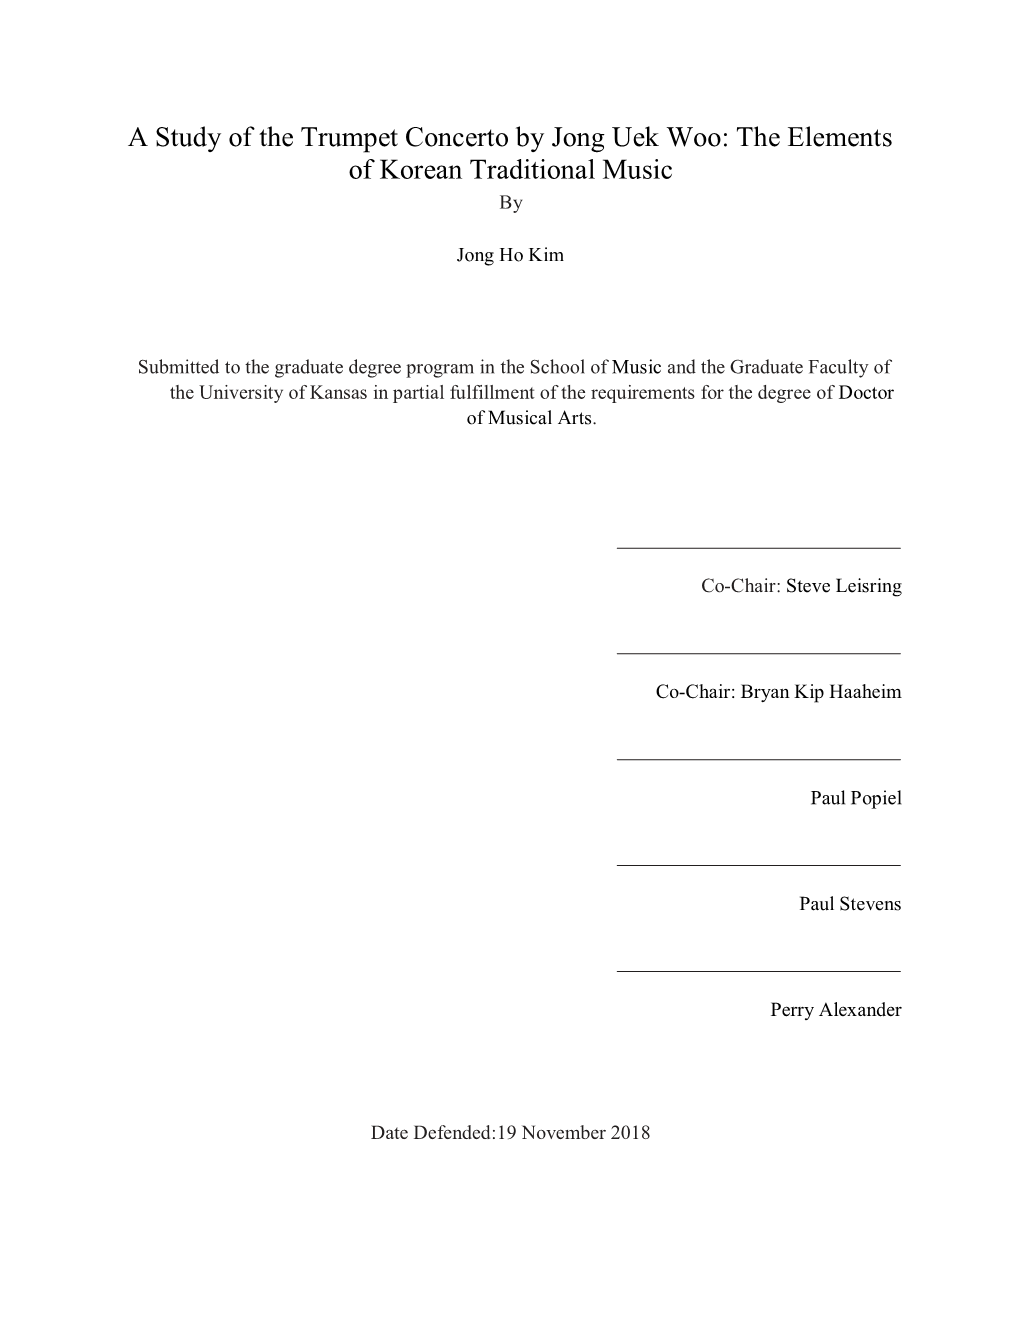 The Elements of Korean Traditional Music By